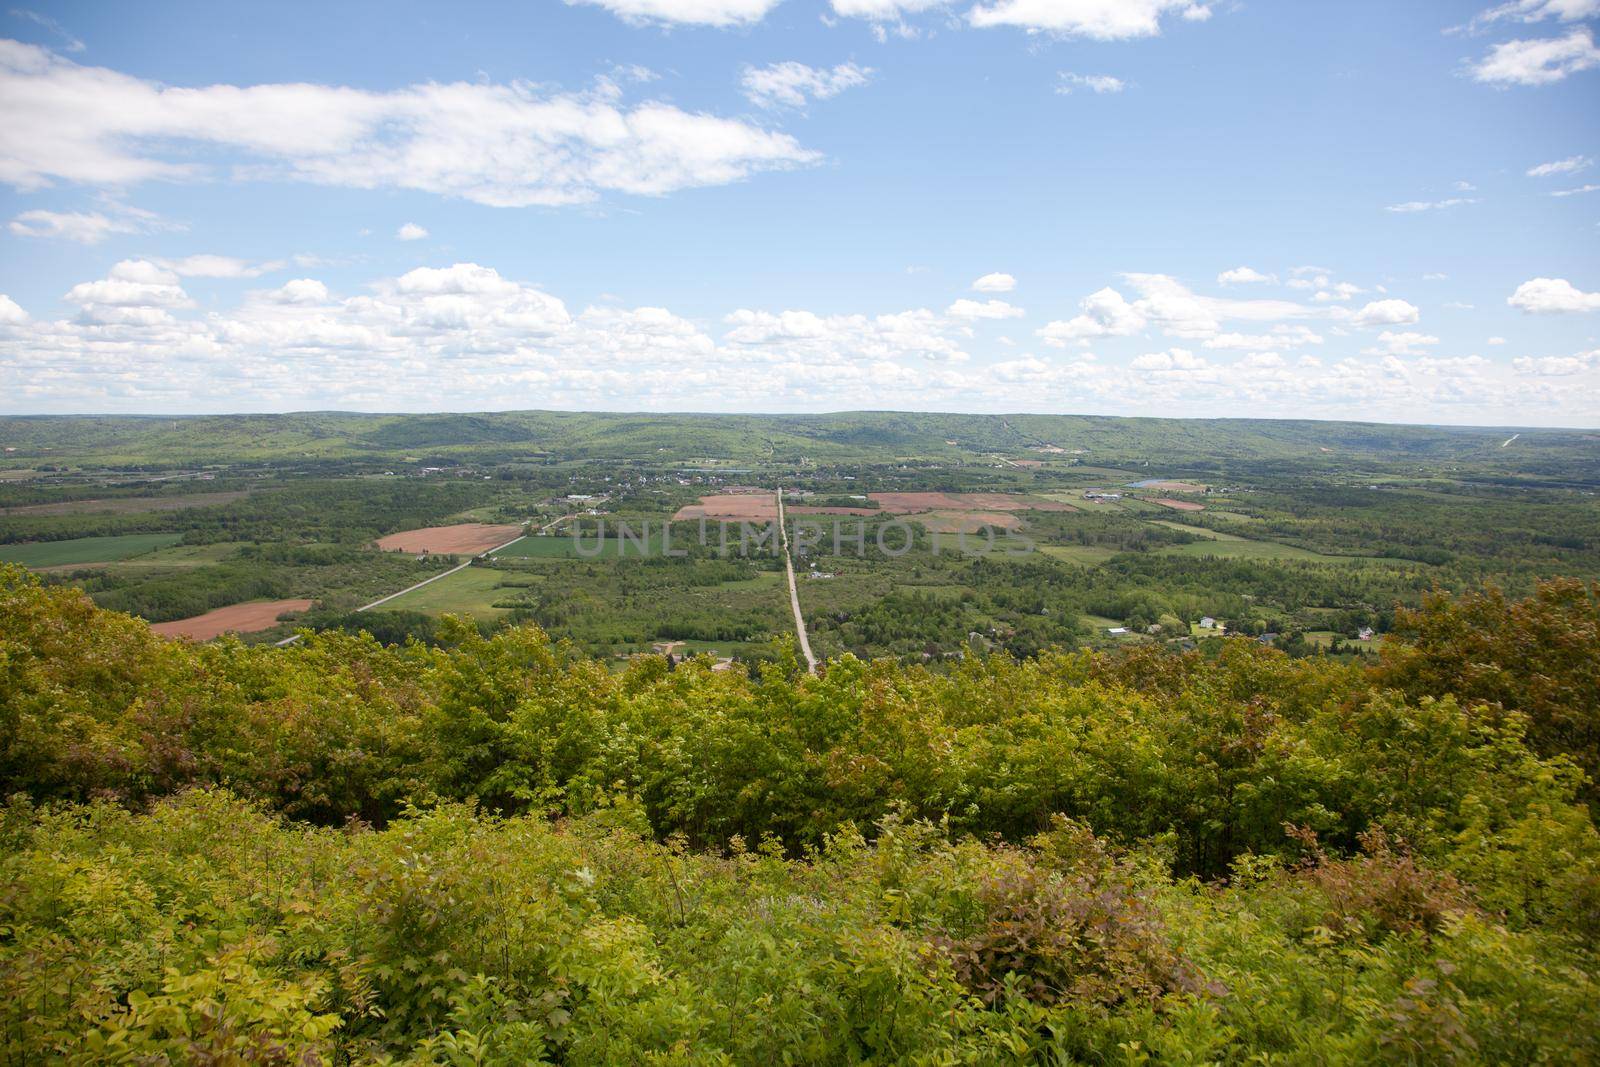 Looking down at the community of Bridgetown, Nova Scotia in the Annapolis Valley from the north mountain